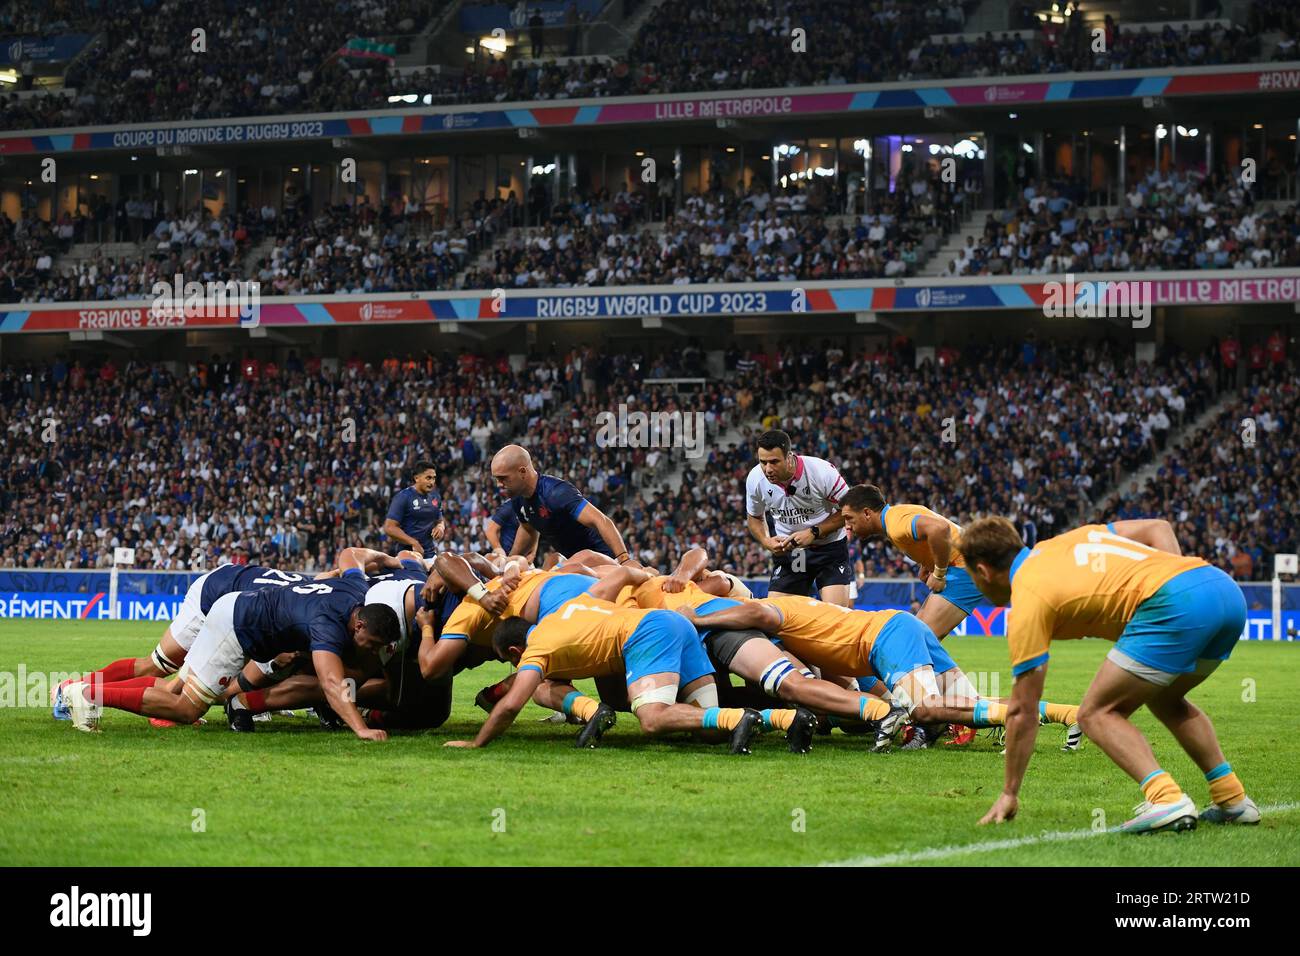 Lille, France. 14th Sep, 2023. Julien Mattia/Le Pictorium - France-Uruguay Rugby World Cup match - 14/09/2023 - France/Hauts de France/Lille - mix during the Rugby World Cup 2023 match between France and Uruguay at Stade Pierre Mauroy, Lille, on September 14, 2023. Credit: LE PICTORIUM/Alamy Live News Stock Photo